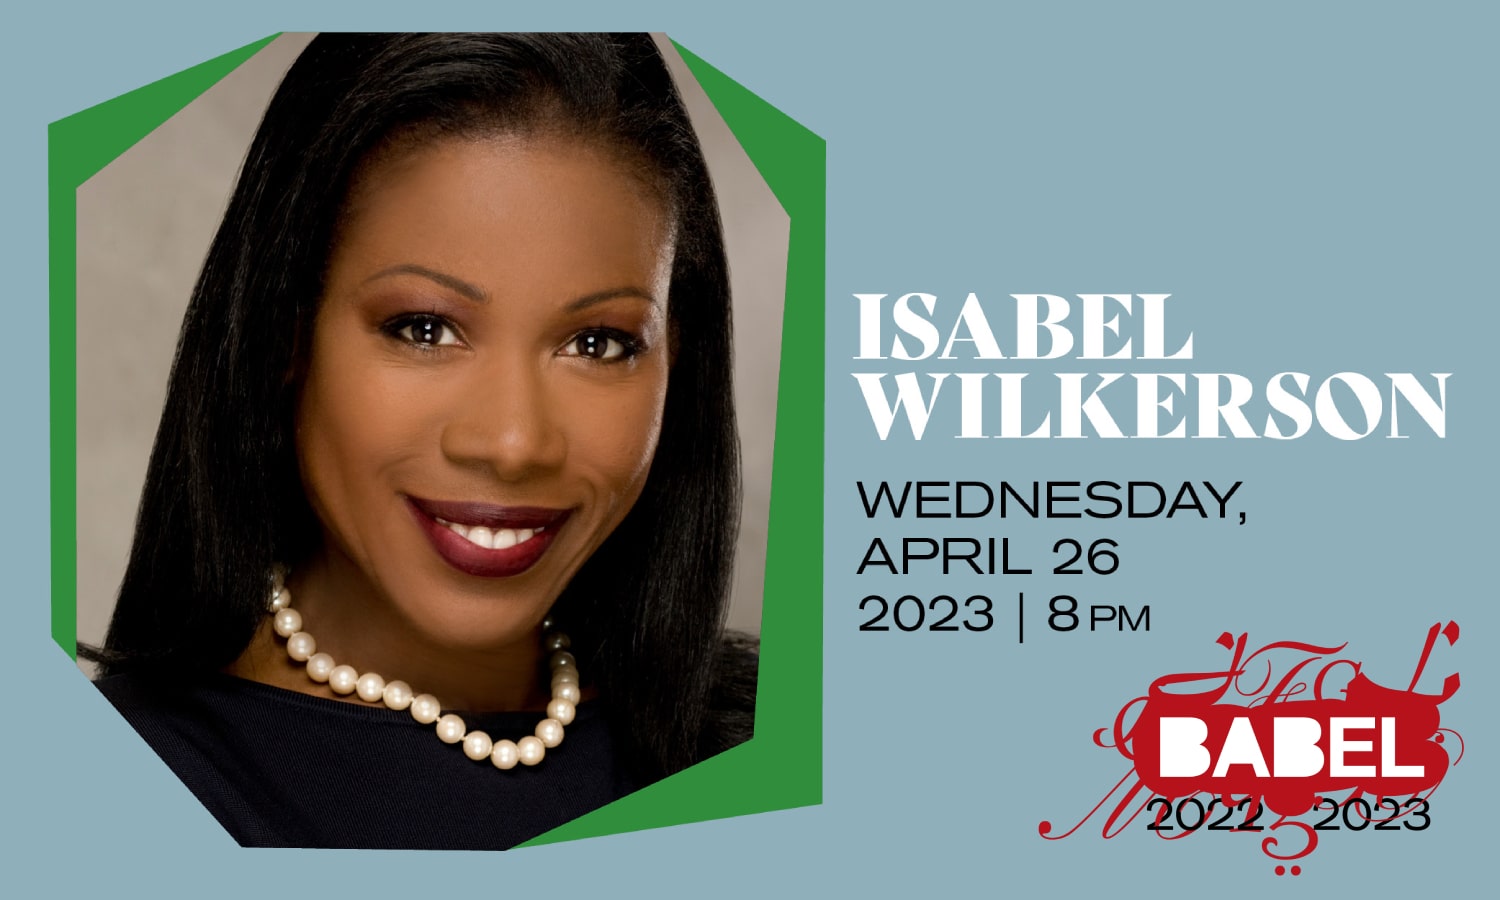 Isabel Wilkerson - Babel 2022-2023 - Just Buffalo Literary Center